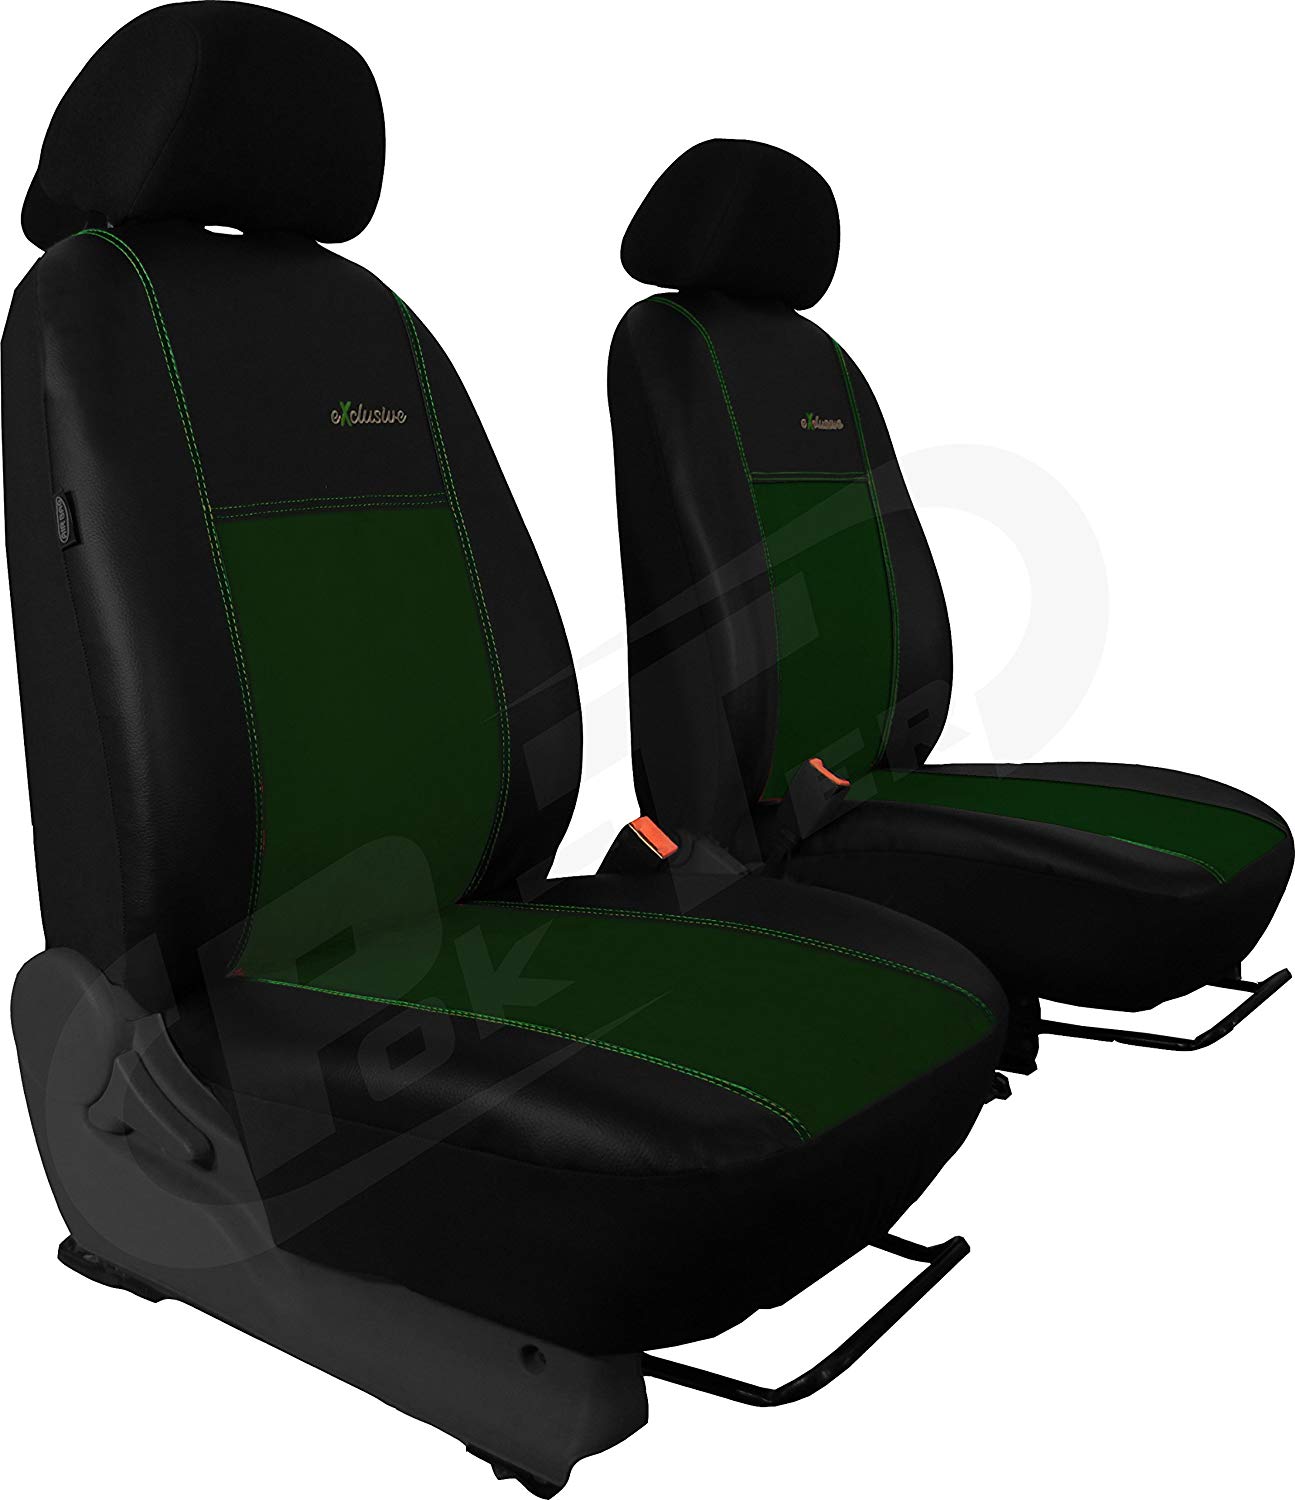 Car Seat Covers Bus 1+1 Alkrantra Exclusive Suitable for Ford Tourneo City in this Offer Green (Available in 5 Colours with Other Offers) Driver seat cover + passenger seat + 2 headrests.